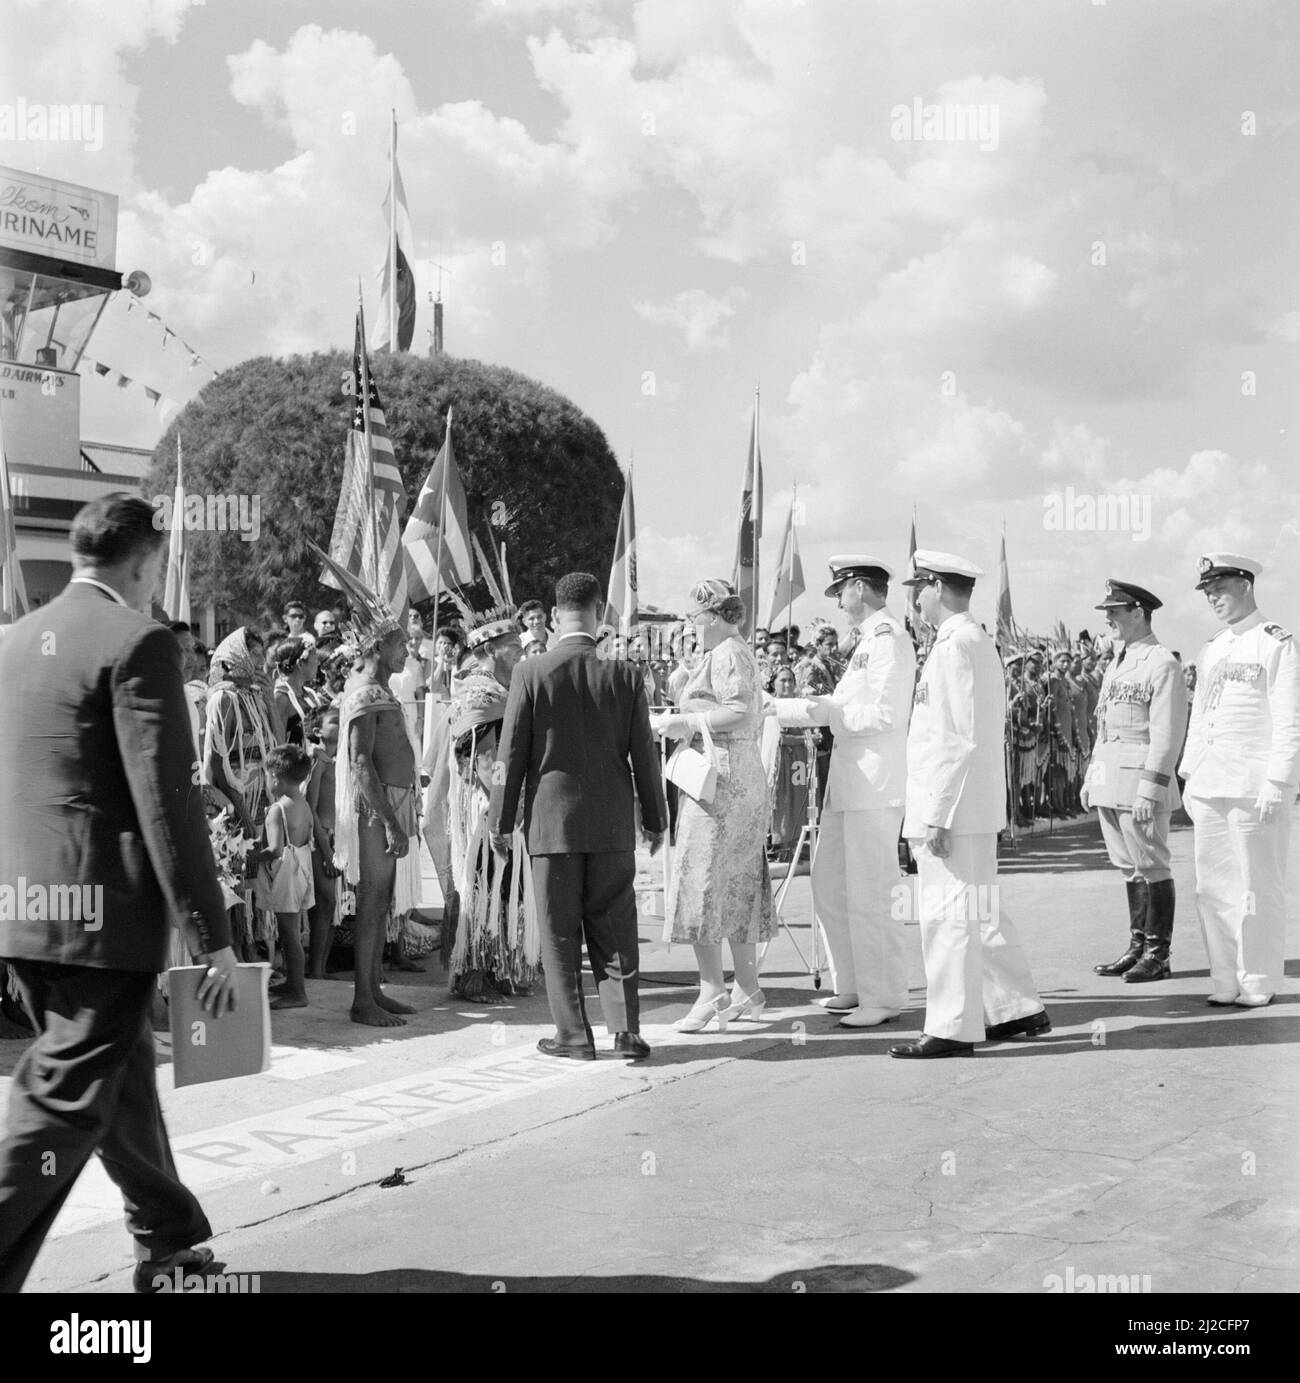 Arrival of Queen and Prince at Zanderij Airport. Greeting by Indians. In the middle Johan Ferrier, President of the Council of Ministers ca: October 27, 1955 Stock Photo